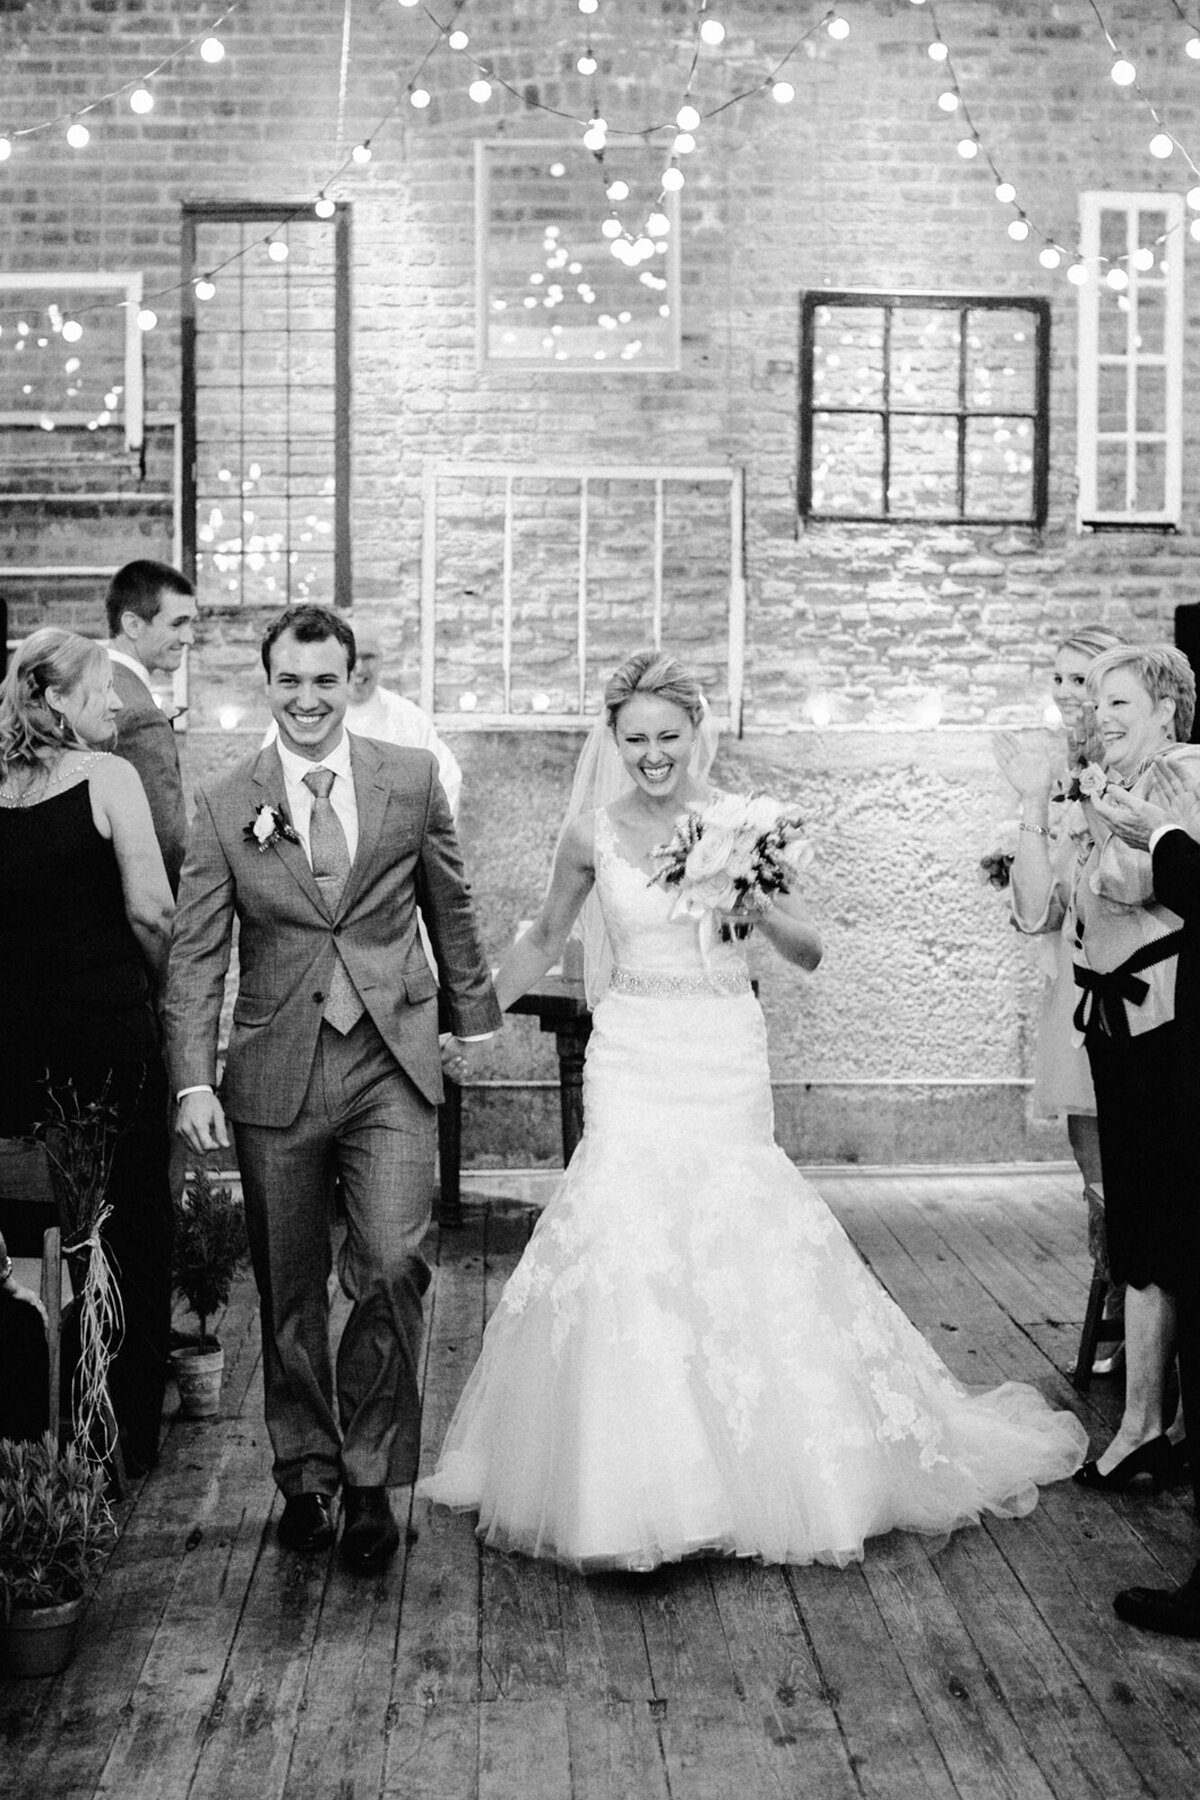 A black and white photo captured at the end of a wedding ceremony at Gallery 1028 in Chicago